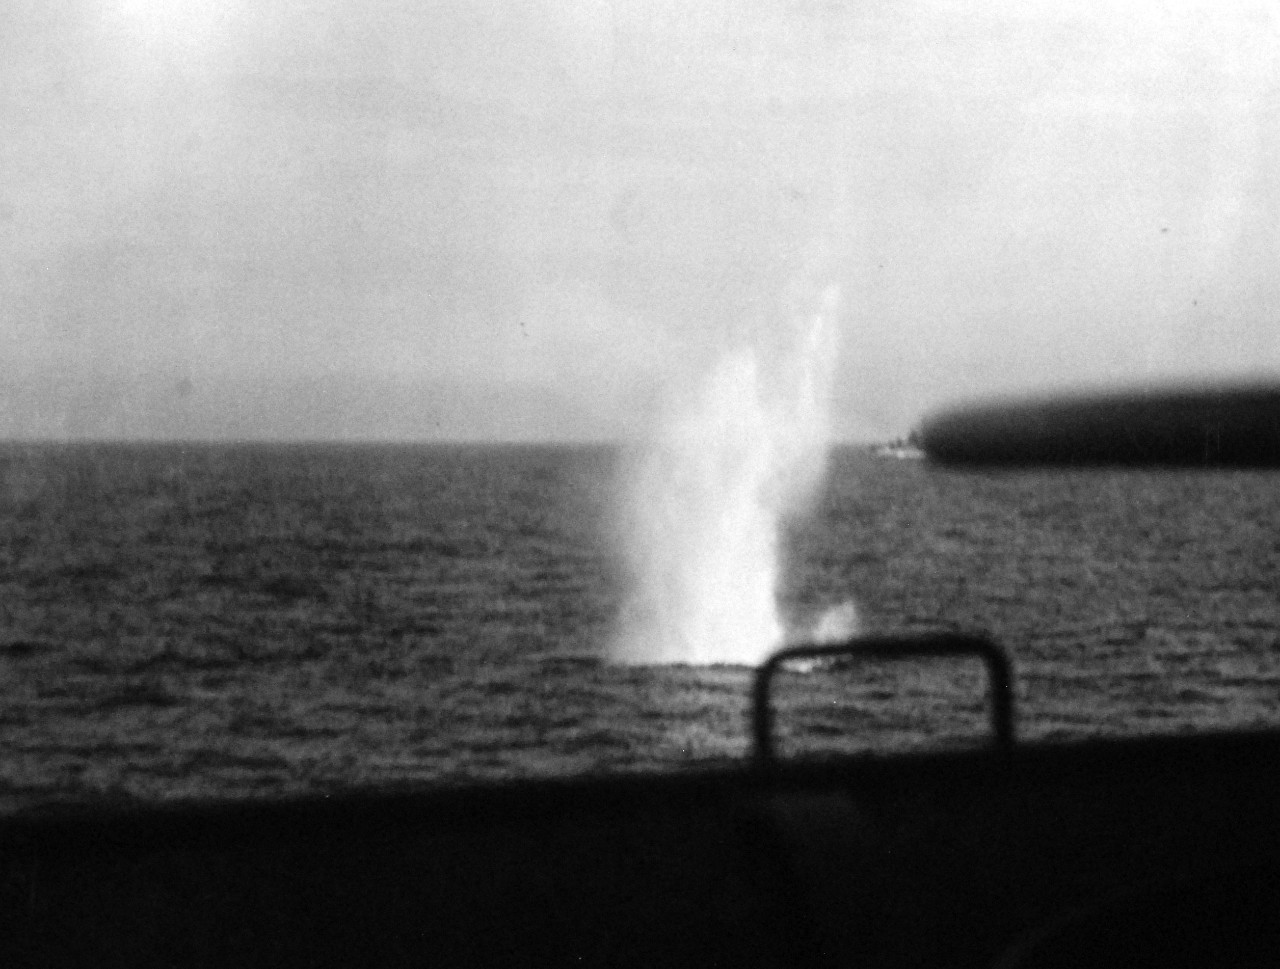 <p>80-G-38827: Naval Battle of Casablanca, 8-16 November 1942. Shells from French battleship Jean Bart land in the water near USS Massachusetts (BB 59). Shown is a near miss of 15” shell just off the fantail.&nbsp;</p>
